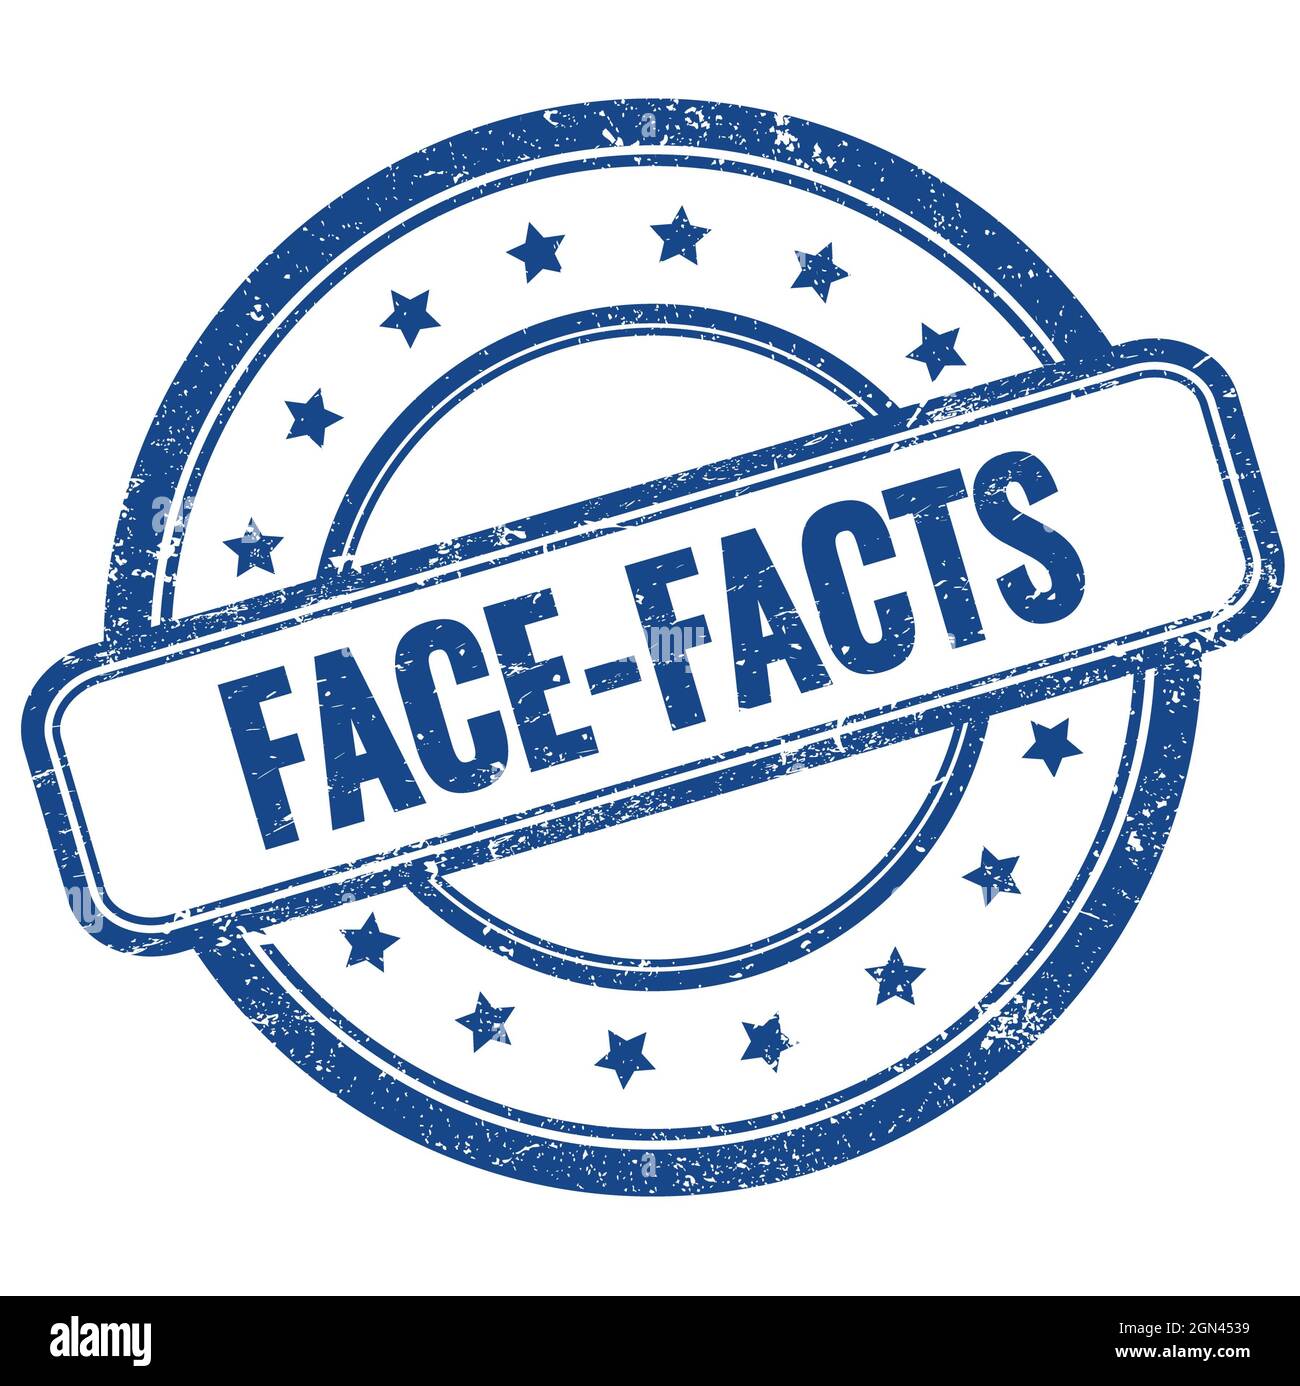 FACE-FACTS text on blue vintage grungy round rubber stamp. Stock Photo